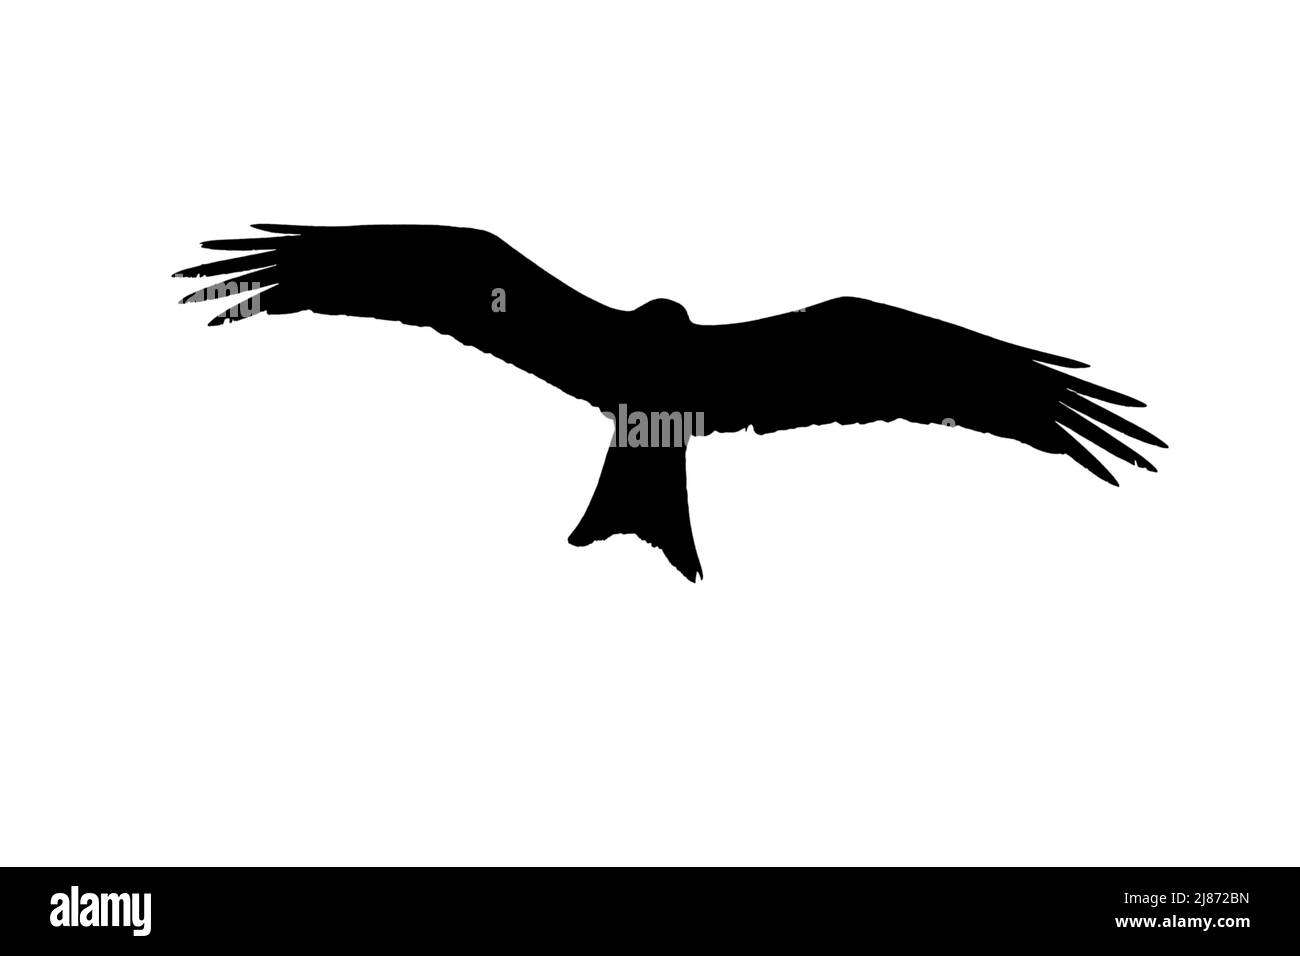 Bird of prey from silhouette?, Observation, UK and Ireland